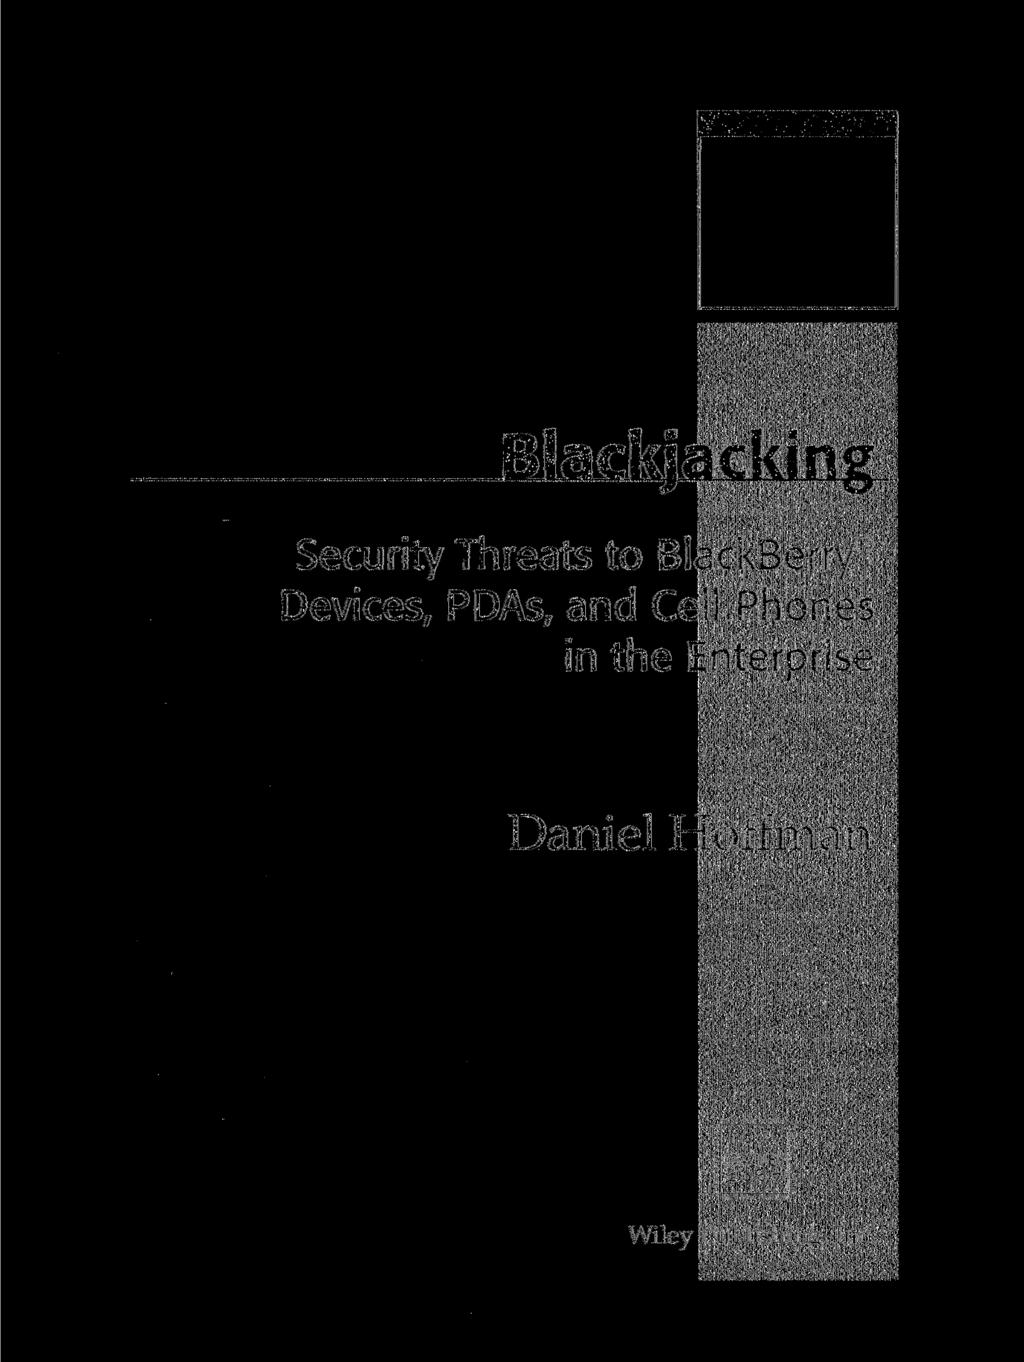 Blackjacking Security Threats to BlackBerry Devices, PDAs, and